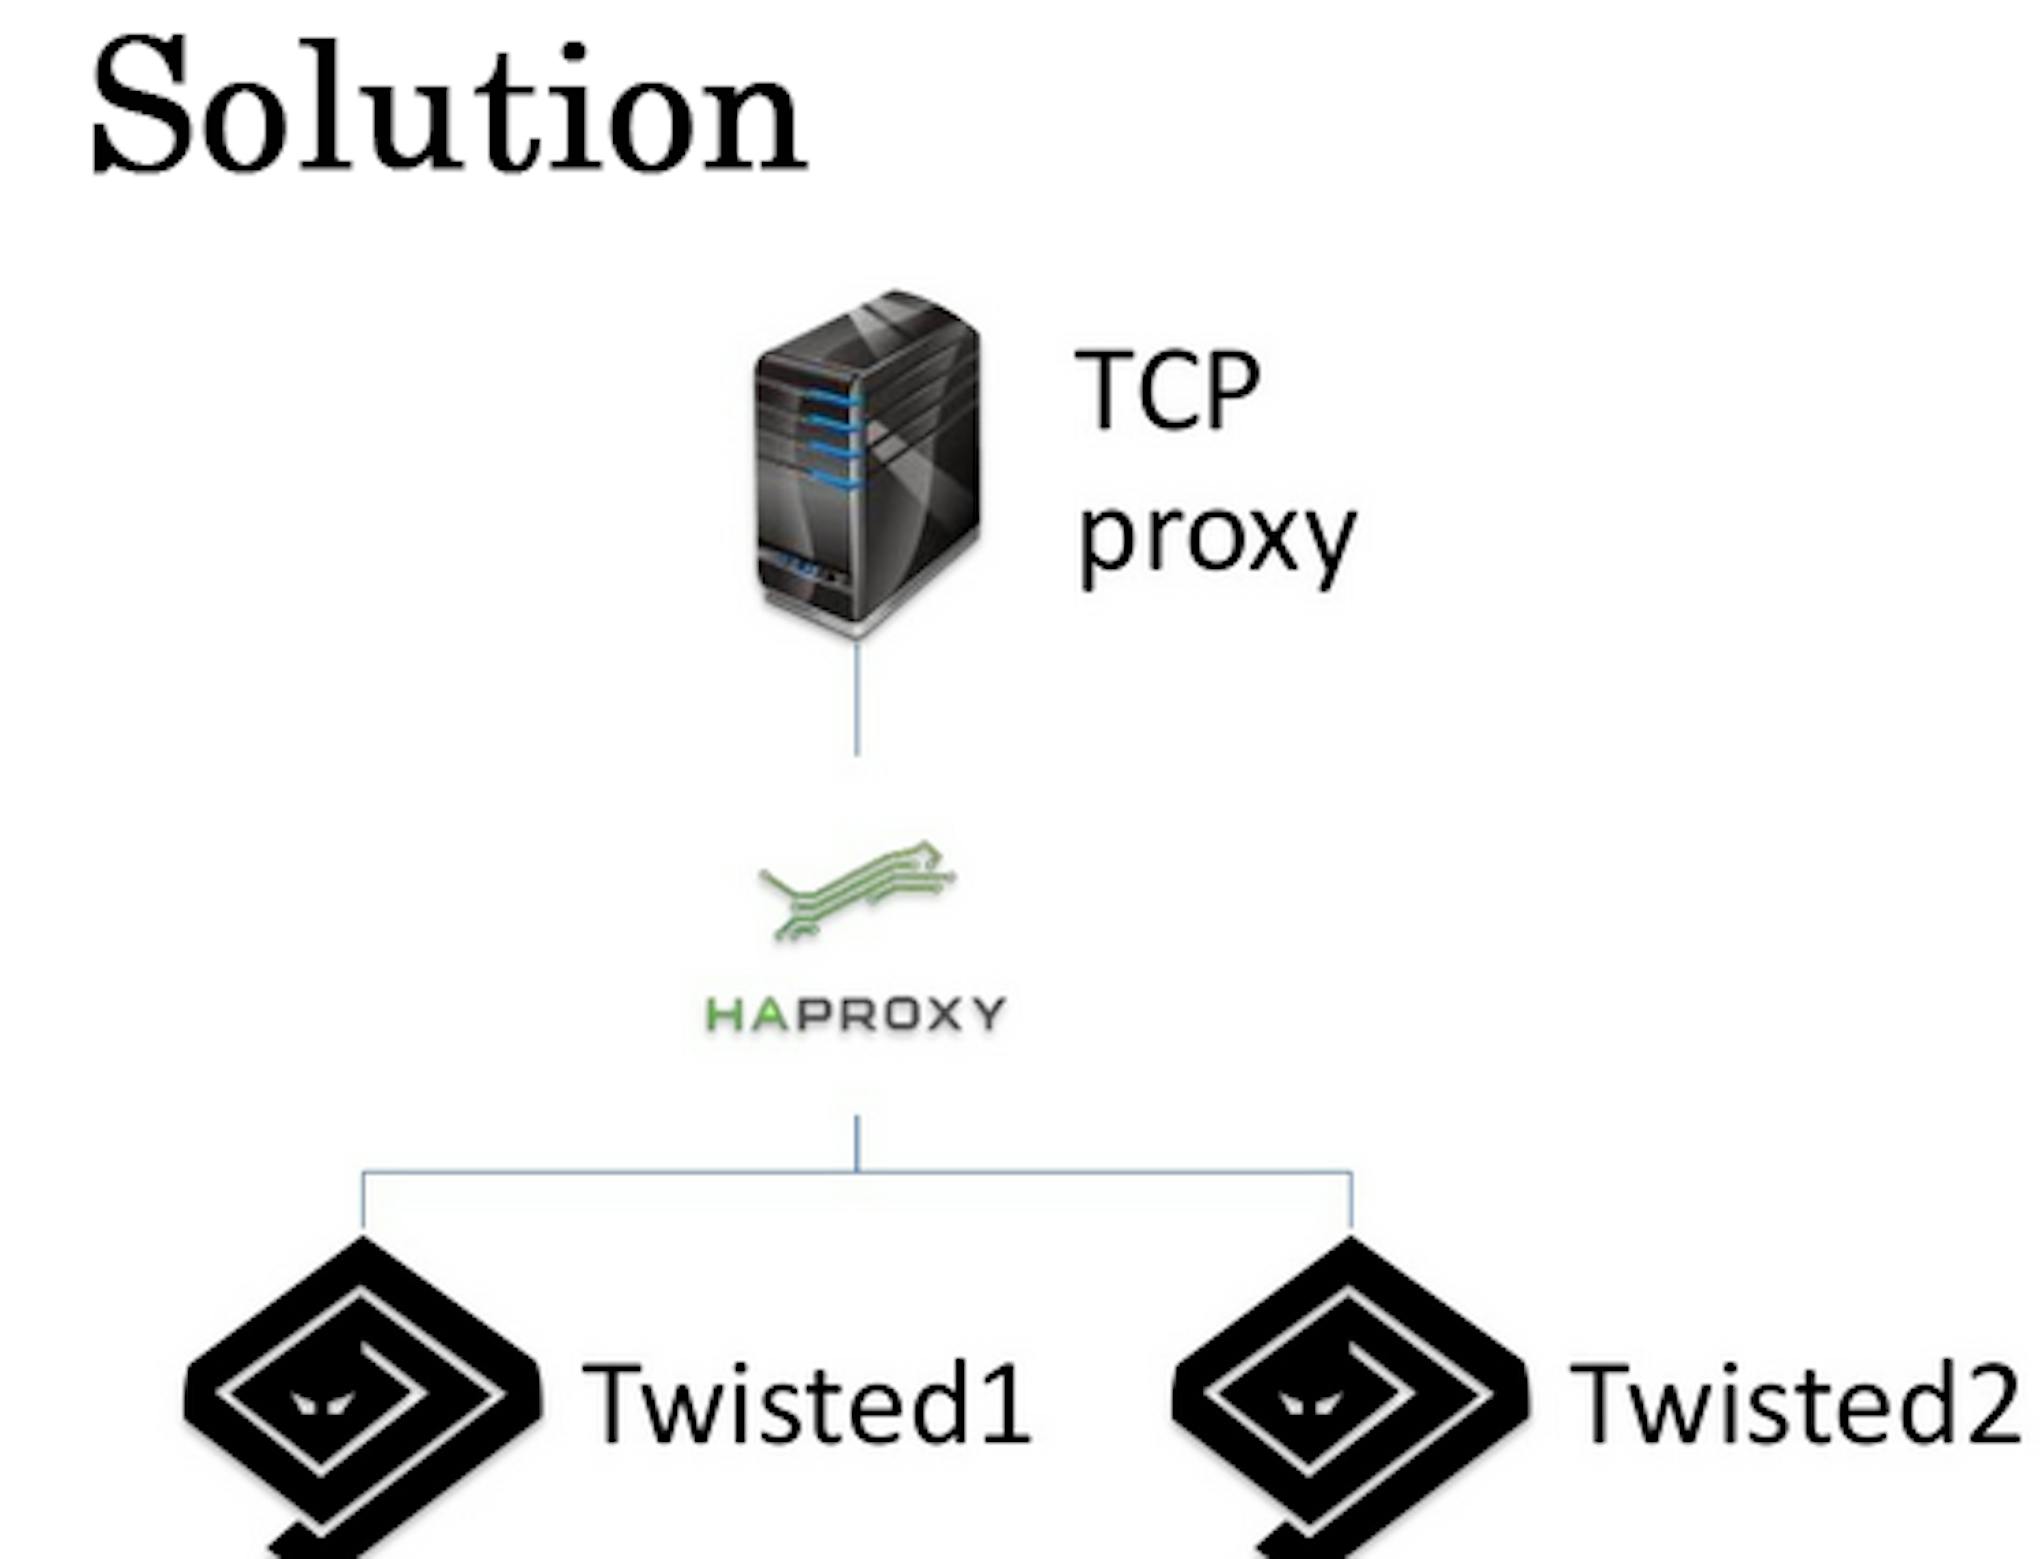 Solution, which Transferred Traffic from Twisted to Another Virtual Machine.